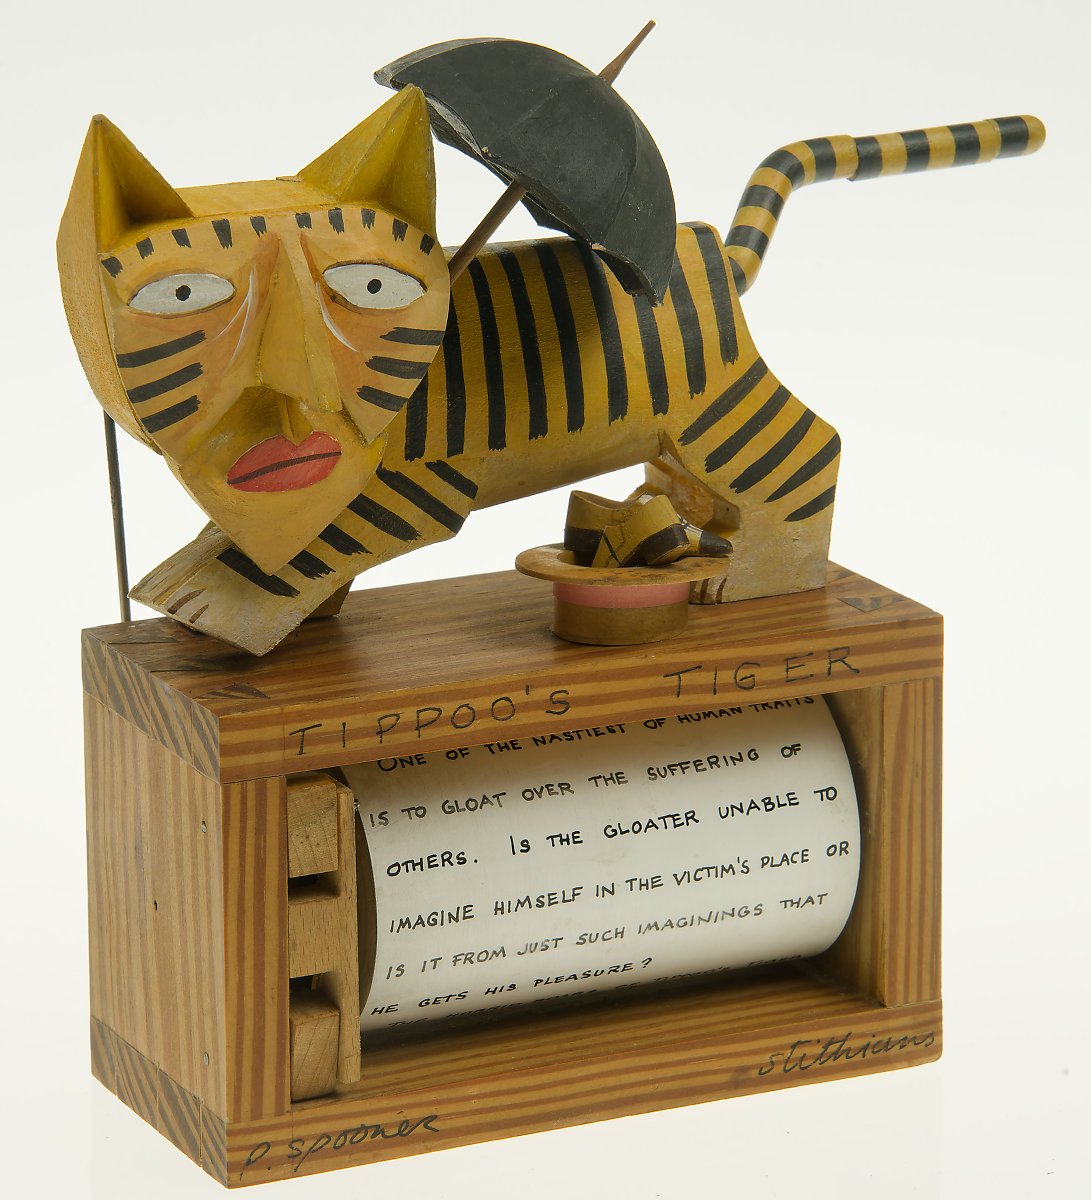 A carved wooden tiger holding an umbrella. A hat and shoes are in front of him. There is a barrel with text in the box below him.